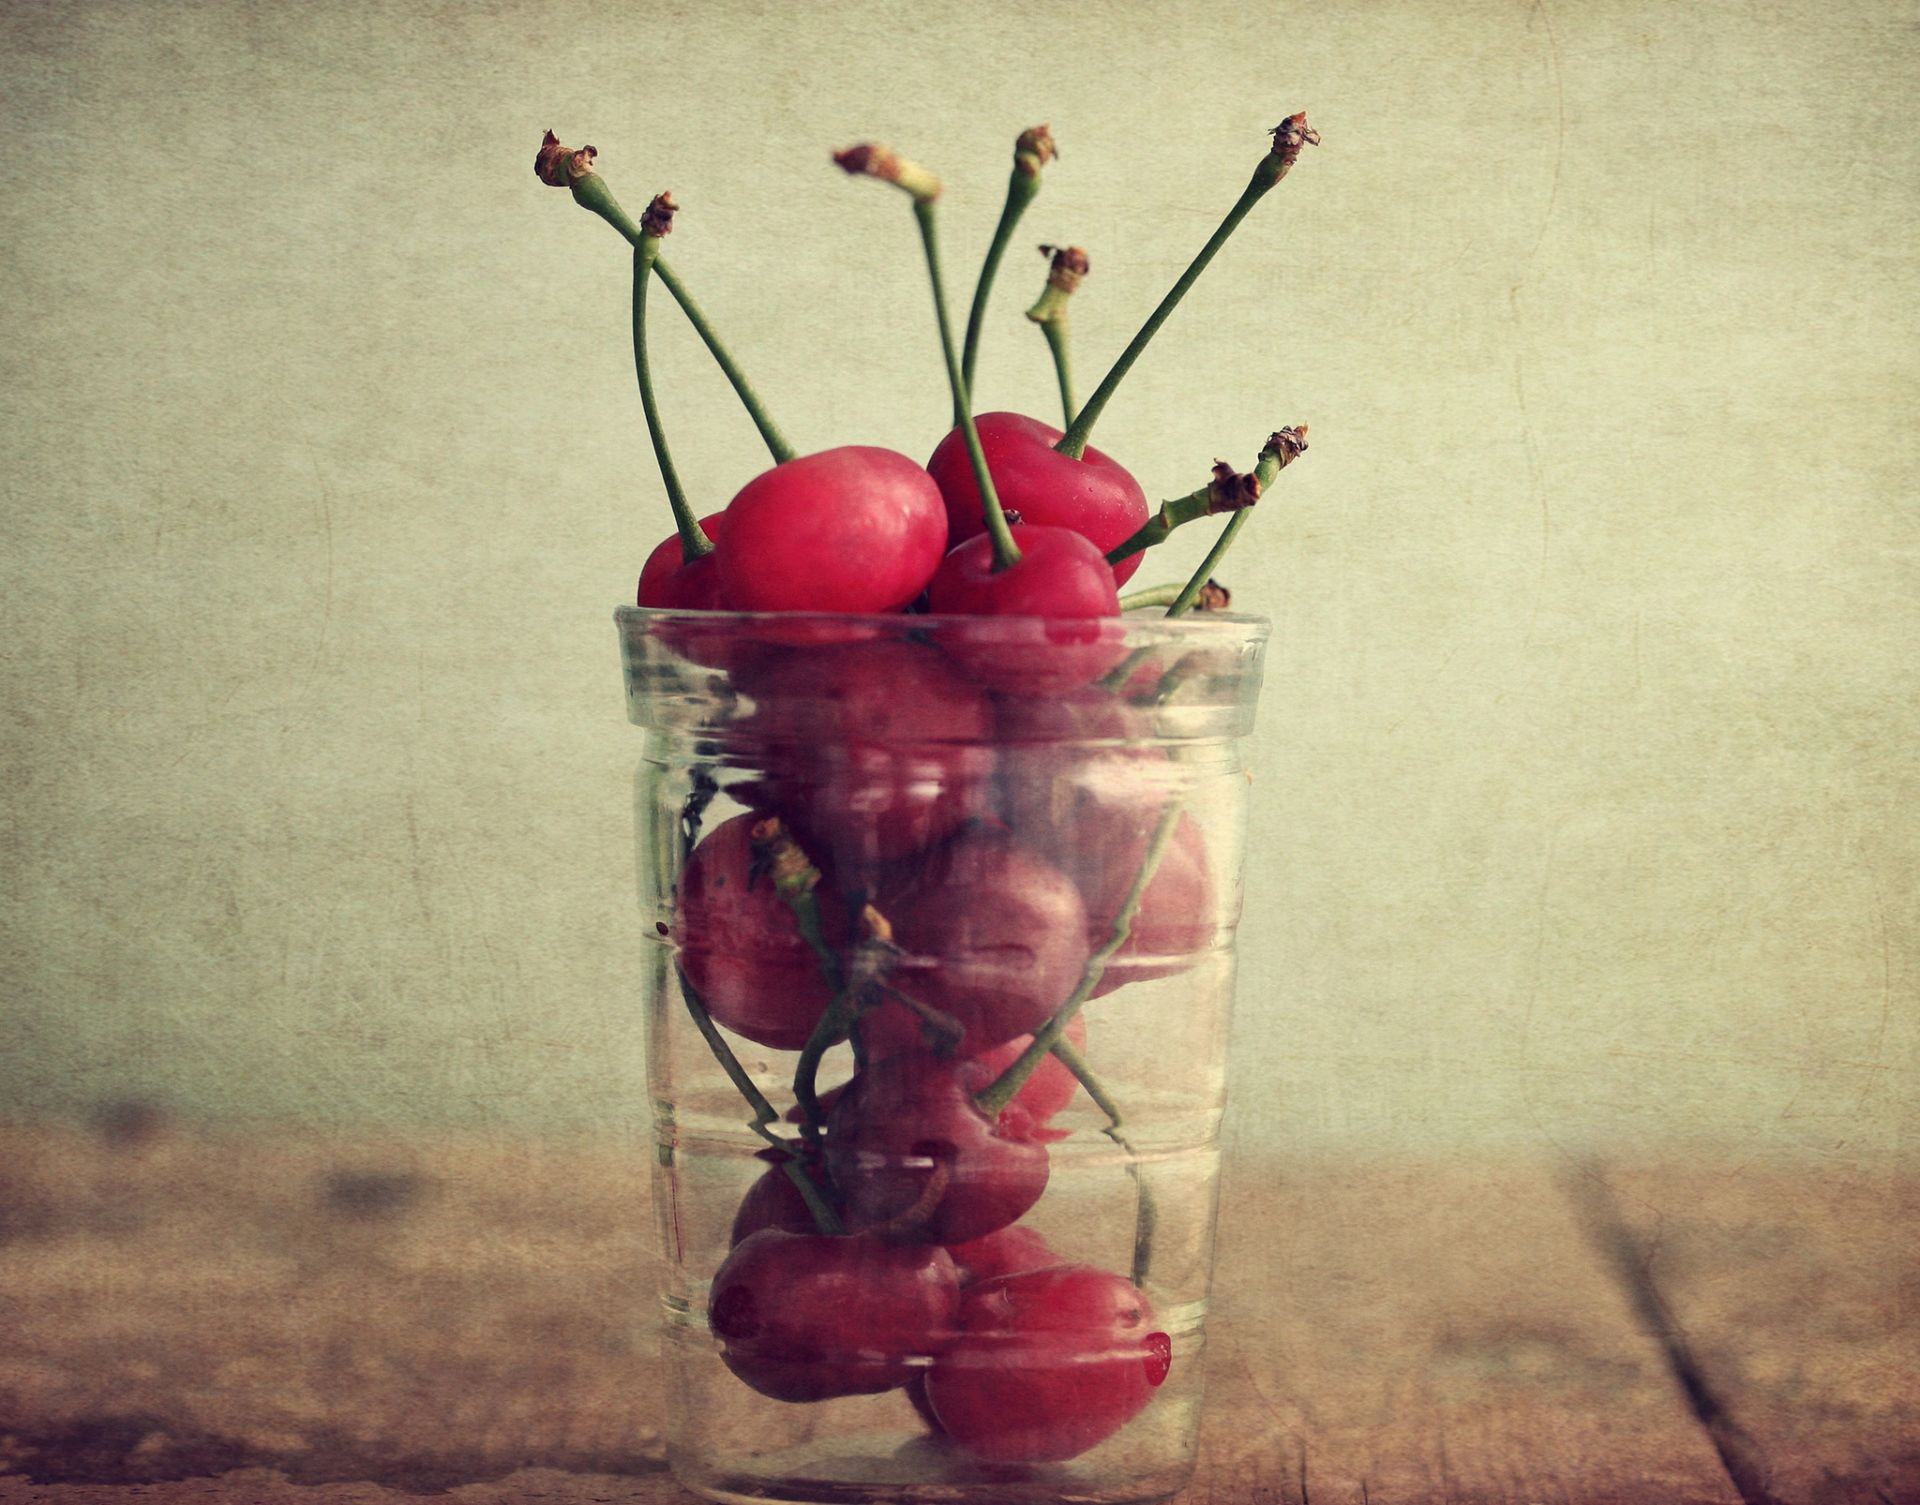 122 Cherry HD Wallpapers | Backgrounds - Wallpaper Abyss - Page 4